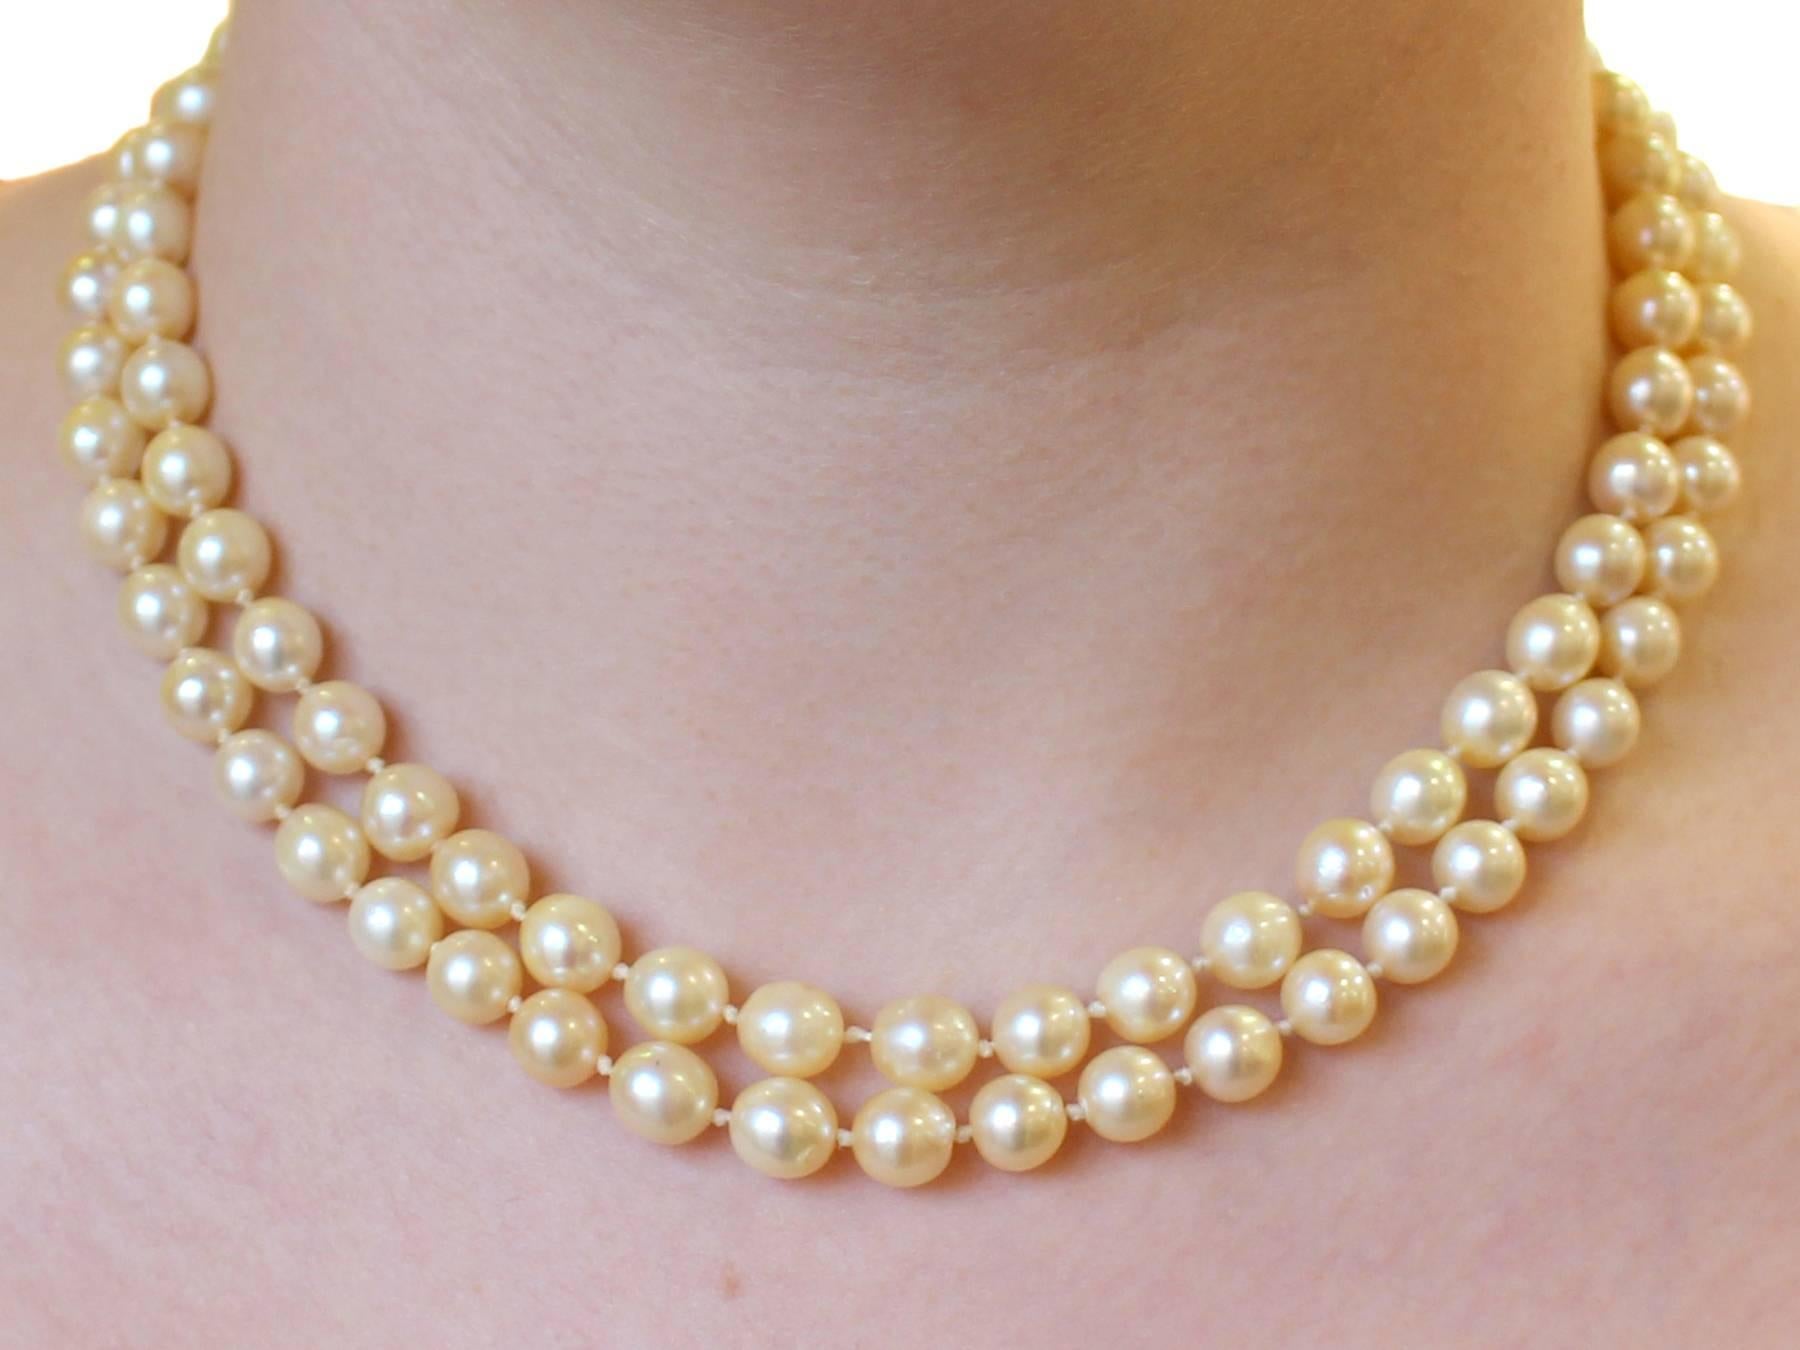 Double Strand Pearl Necklace with 18k Yellow Gold Locket Clasp - Vintage 3